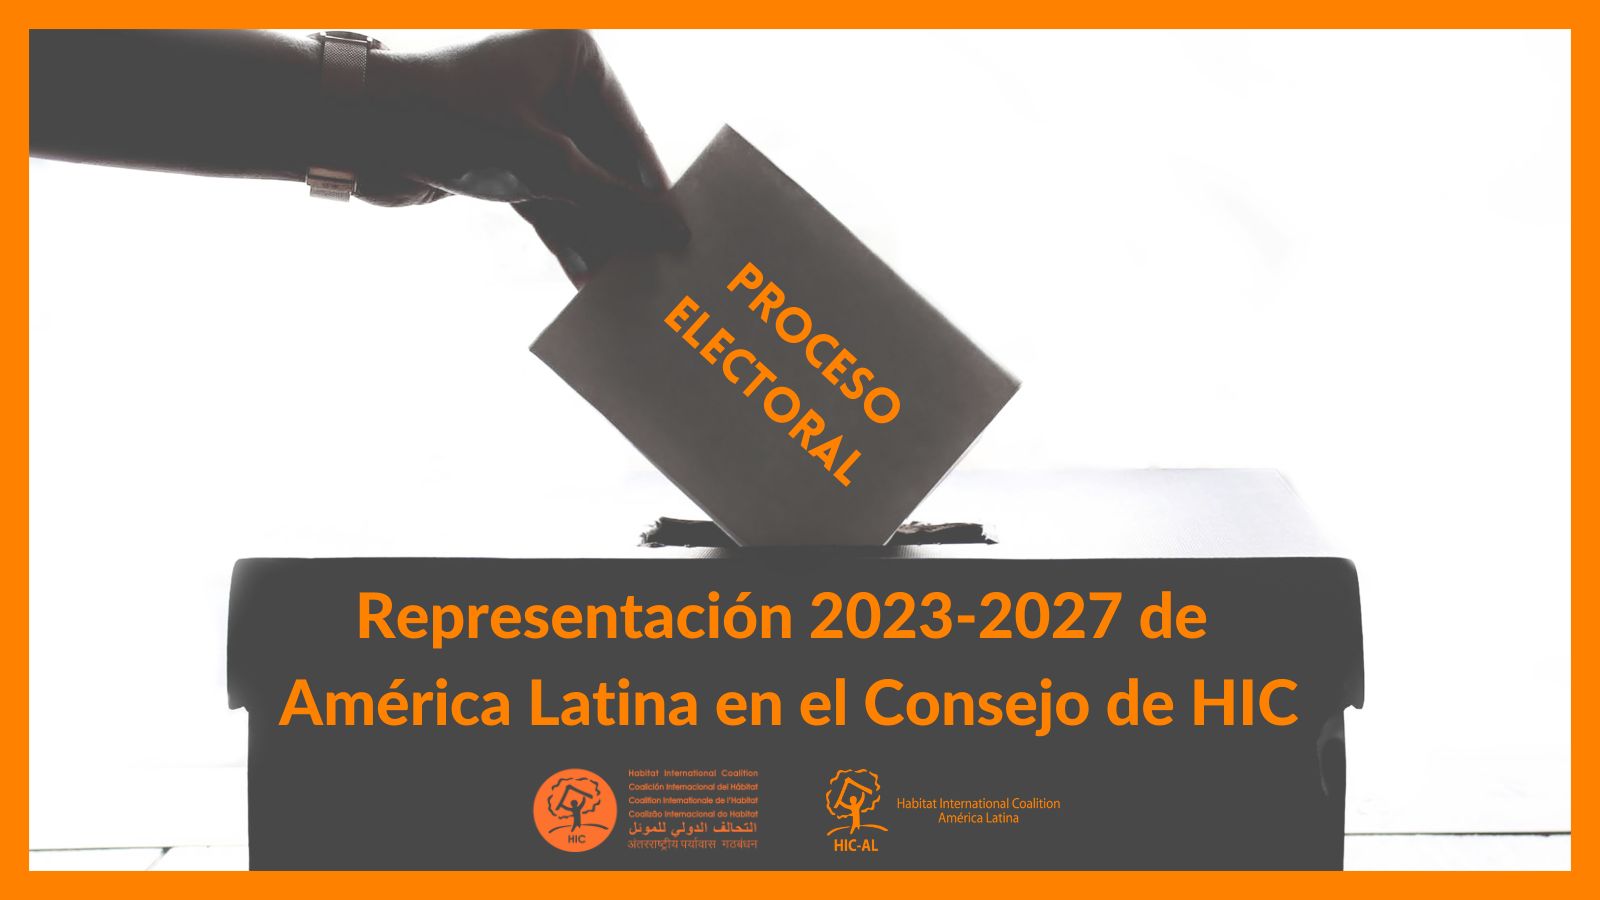 Election process for the 2023-2027 Latin American representation on the HIC Board